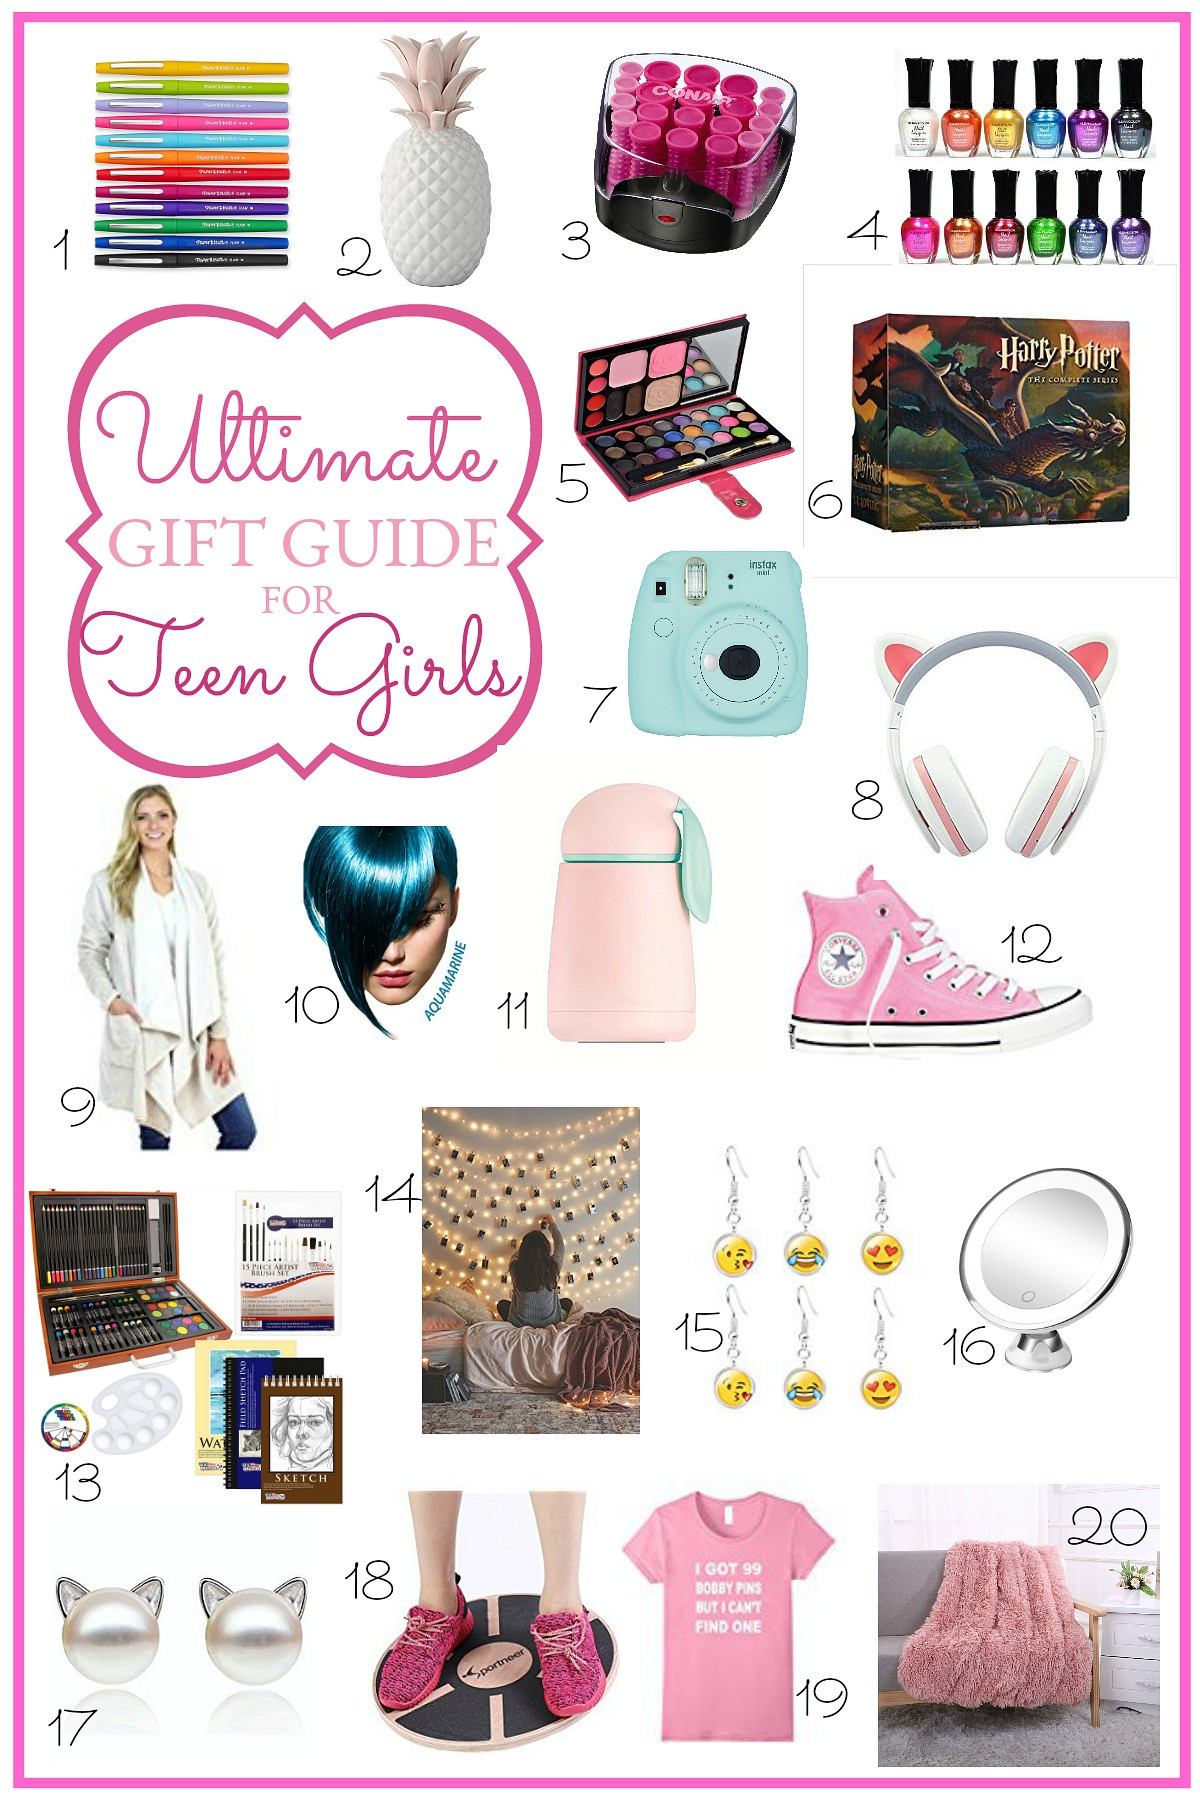 Teenage Girlfriend Gift Ideas
 Ultimate Holiday Gift Guide for Teen Girls